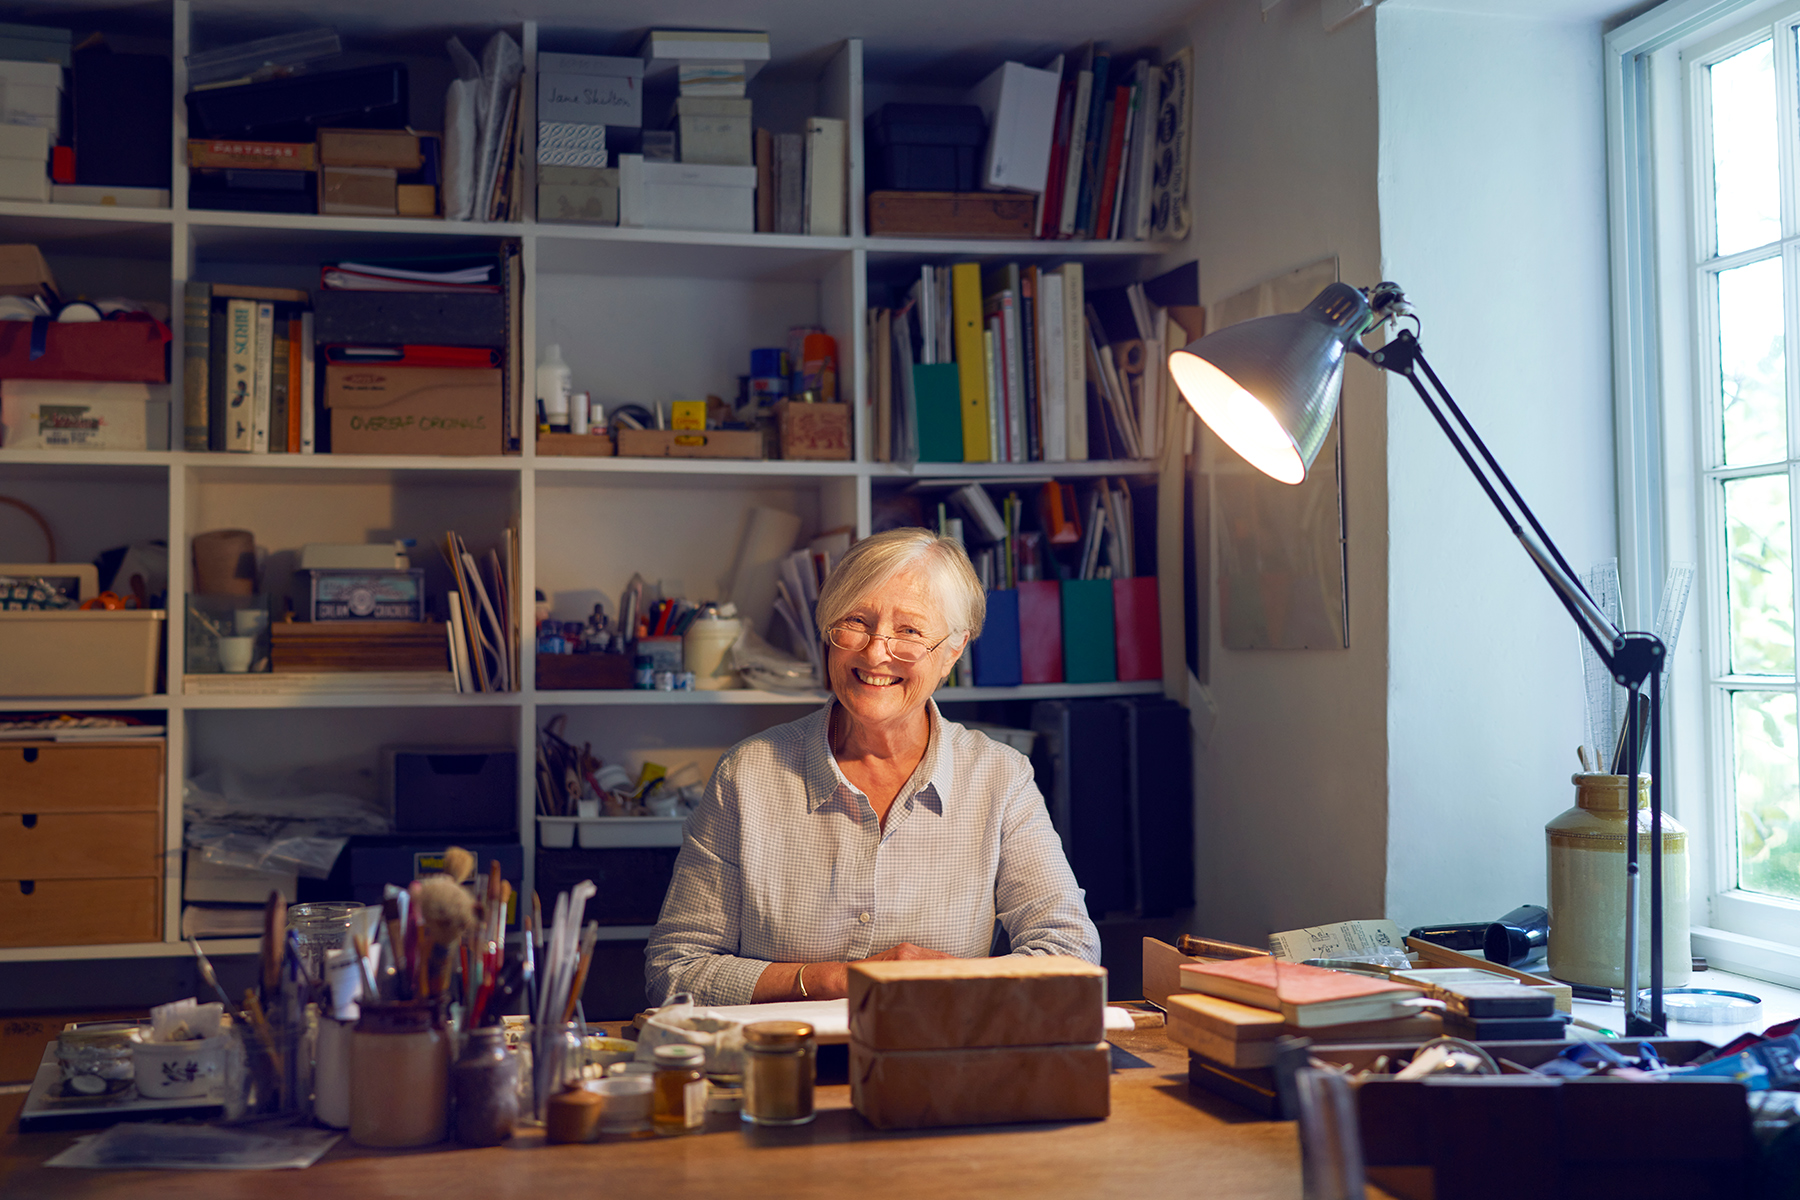 A photograph of Susan Ogilvy at her desk in her studio